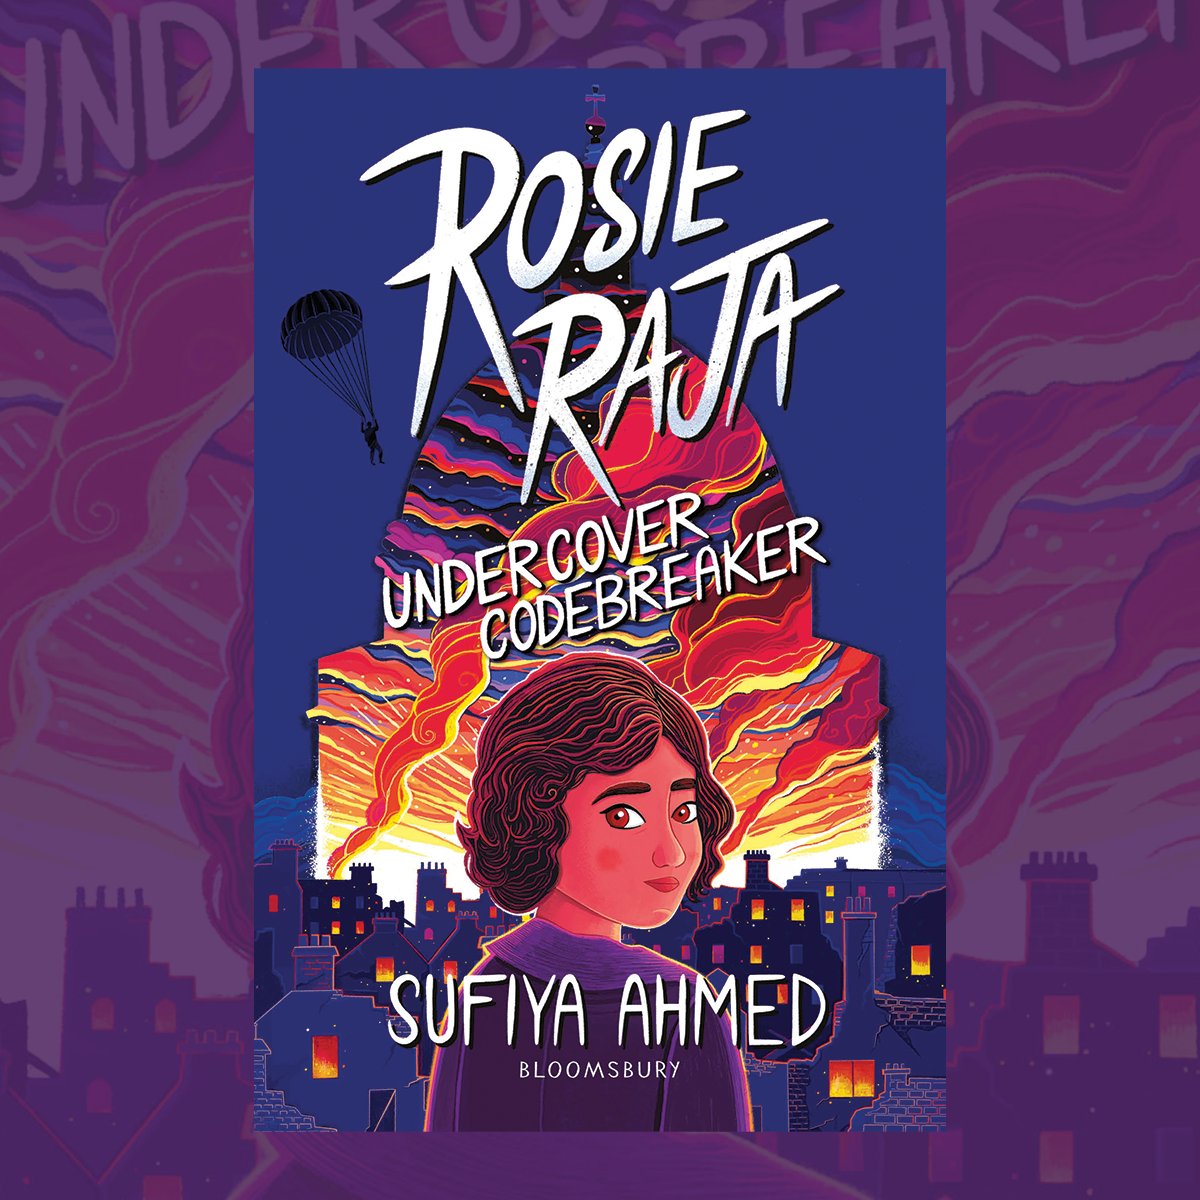 🥳 to reveal the cover of the 3rd #RosieRaja WWII spy adventure... #RosieRajaUndercoverCodebreaker... front cover by @AsifHazem, pub by @HannahTheEditor's fab team @BloomsburyEd. See images below for location of her new spy mission ... Out July 18 ... preorders welcome 🙏